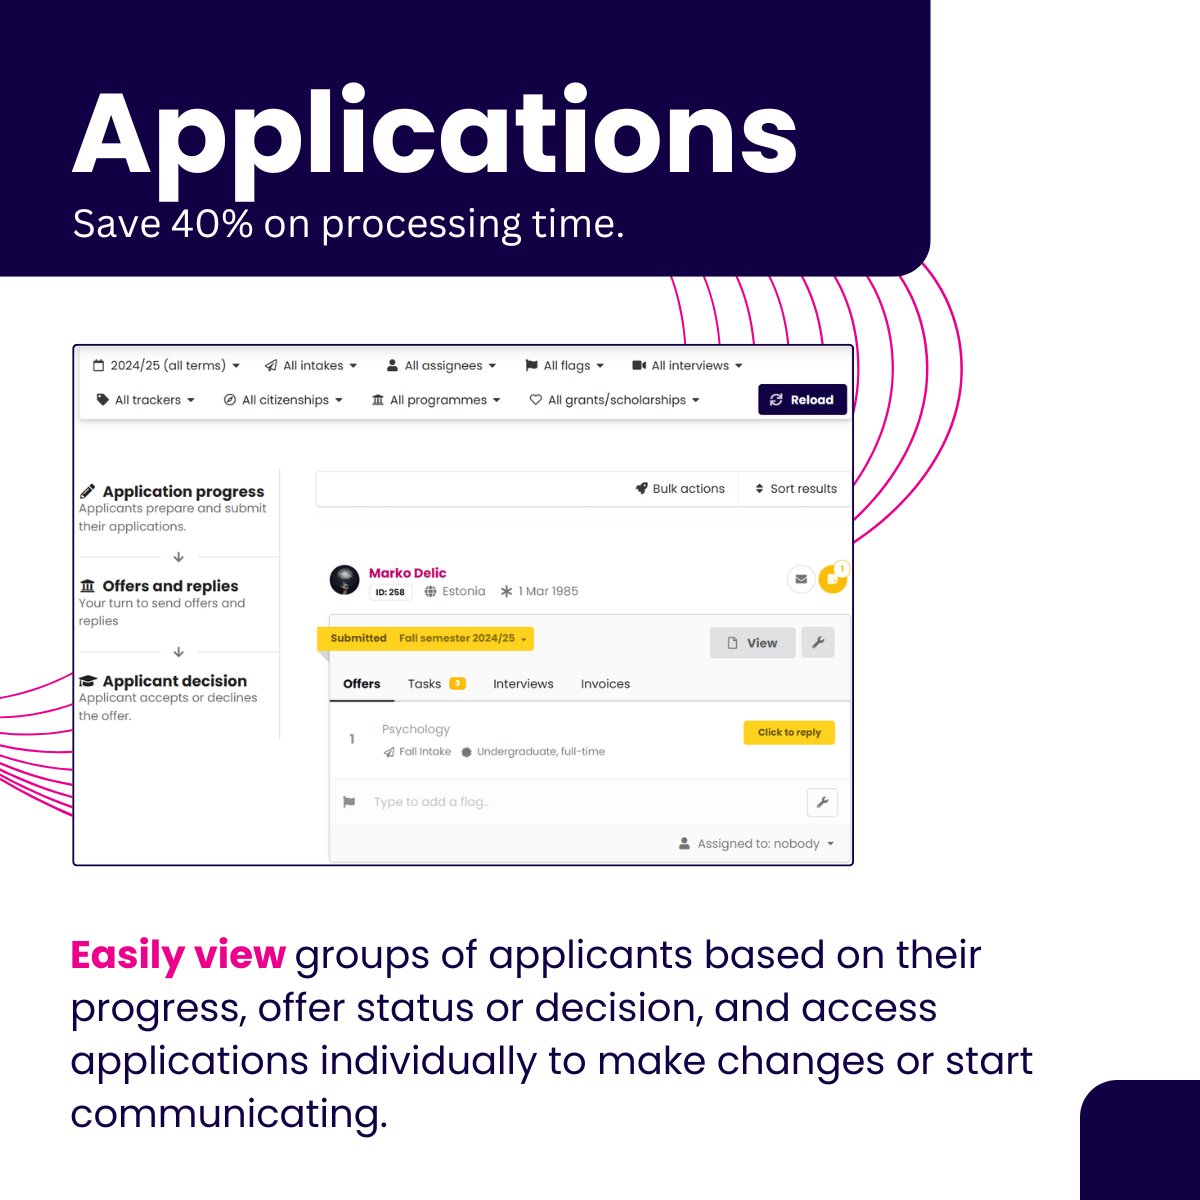 Designing application forms that cater to the specific needs of your programs ensures you gather all relevant information upfront. This reduces the need for follow-up and clarifications, saving time for both administrators and applicants.With DreamApply, you can easily design and customize application forms to suit your institution’s requirements. The platform’s intuitive form builder allows you to include various fields, conditional logic, and instructions, ensuring that you collect all the necessary information from applicants right from the start.